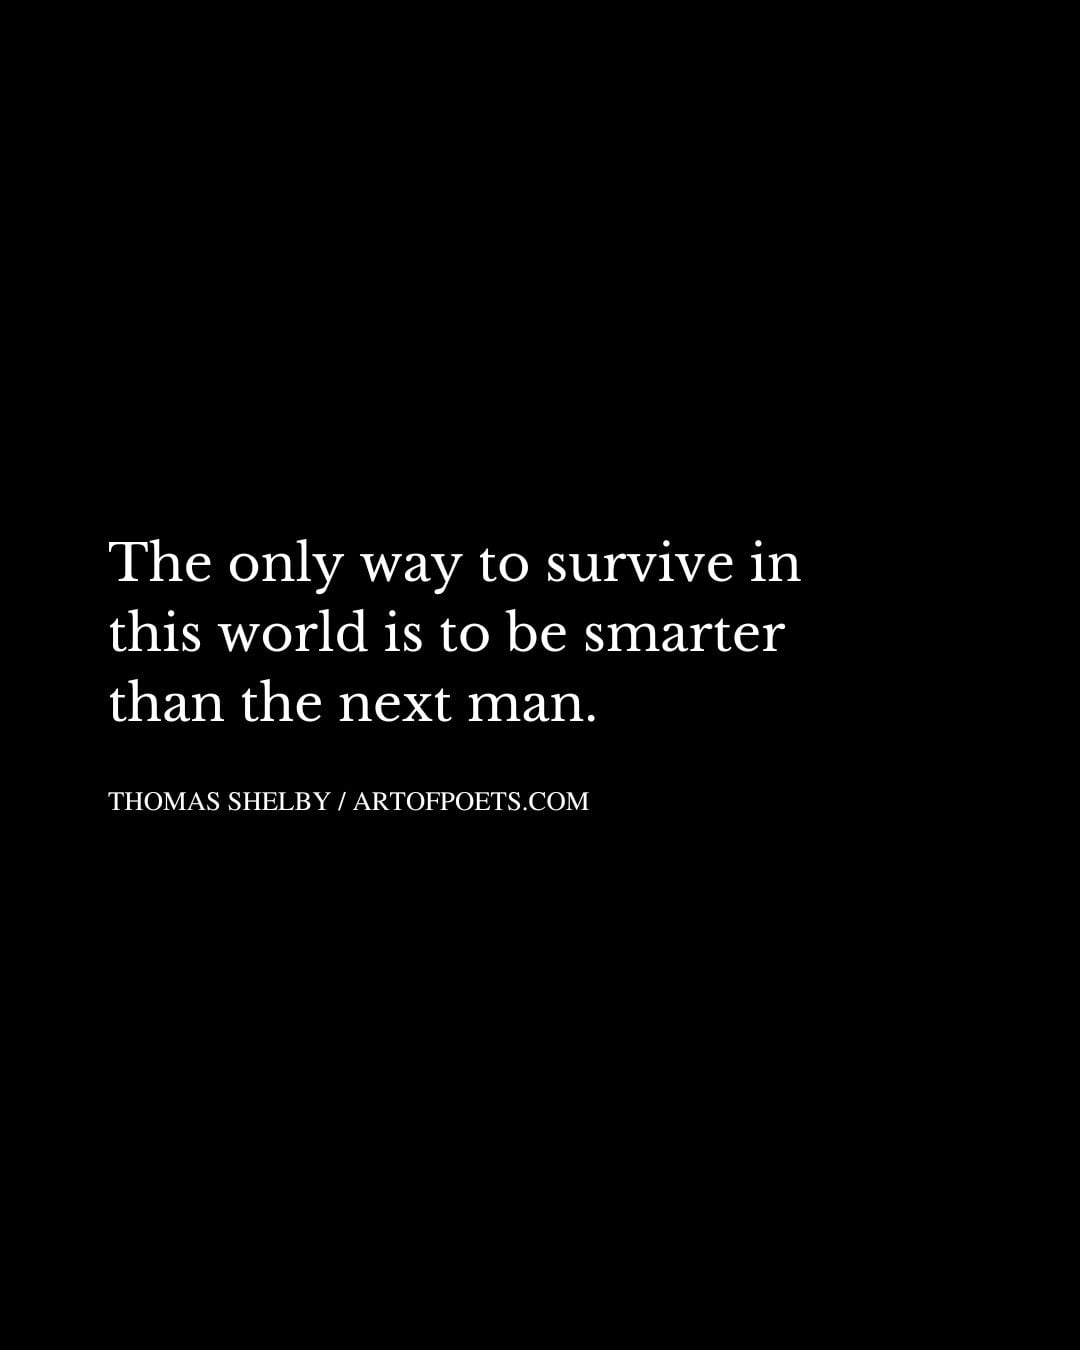 The only way to survive in this world is to be smarter than the next man